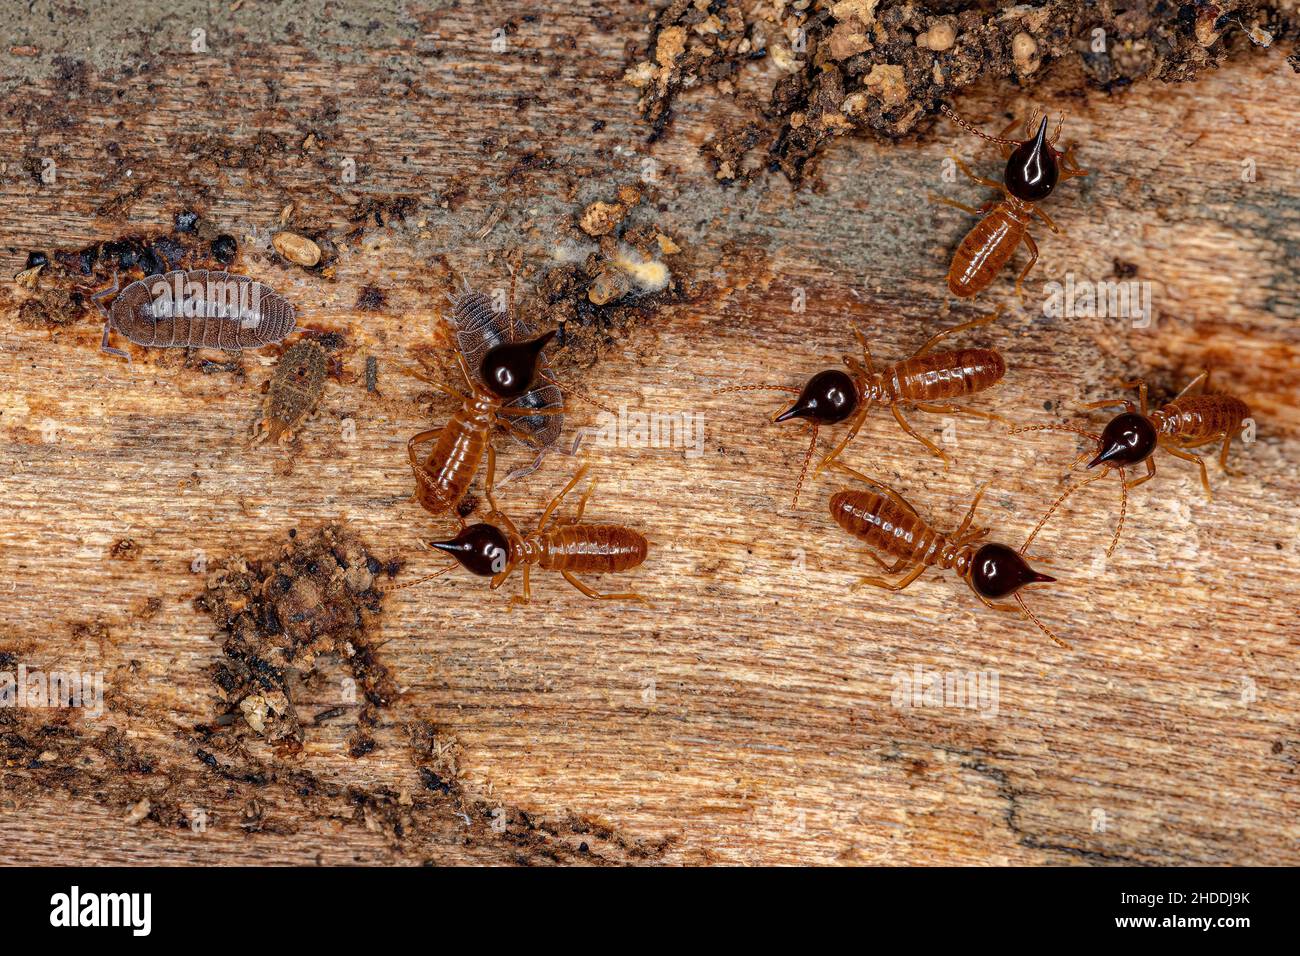 Small Nasute Termites of the Genus Nasutitermes with Flat Bugs Nymphs of the Family Aradidae and Small Isopods Animals of the Order Isopoda Stock Photo